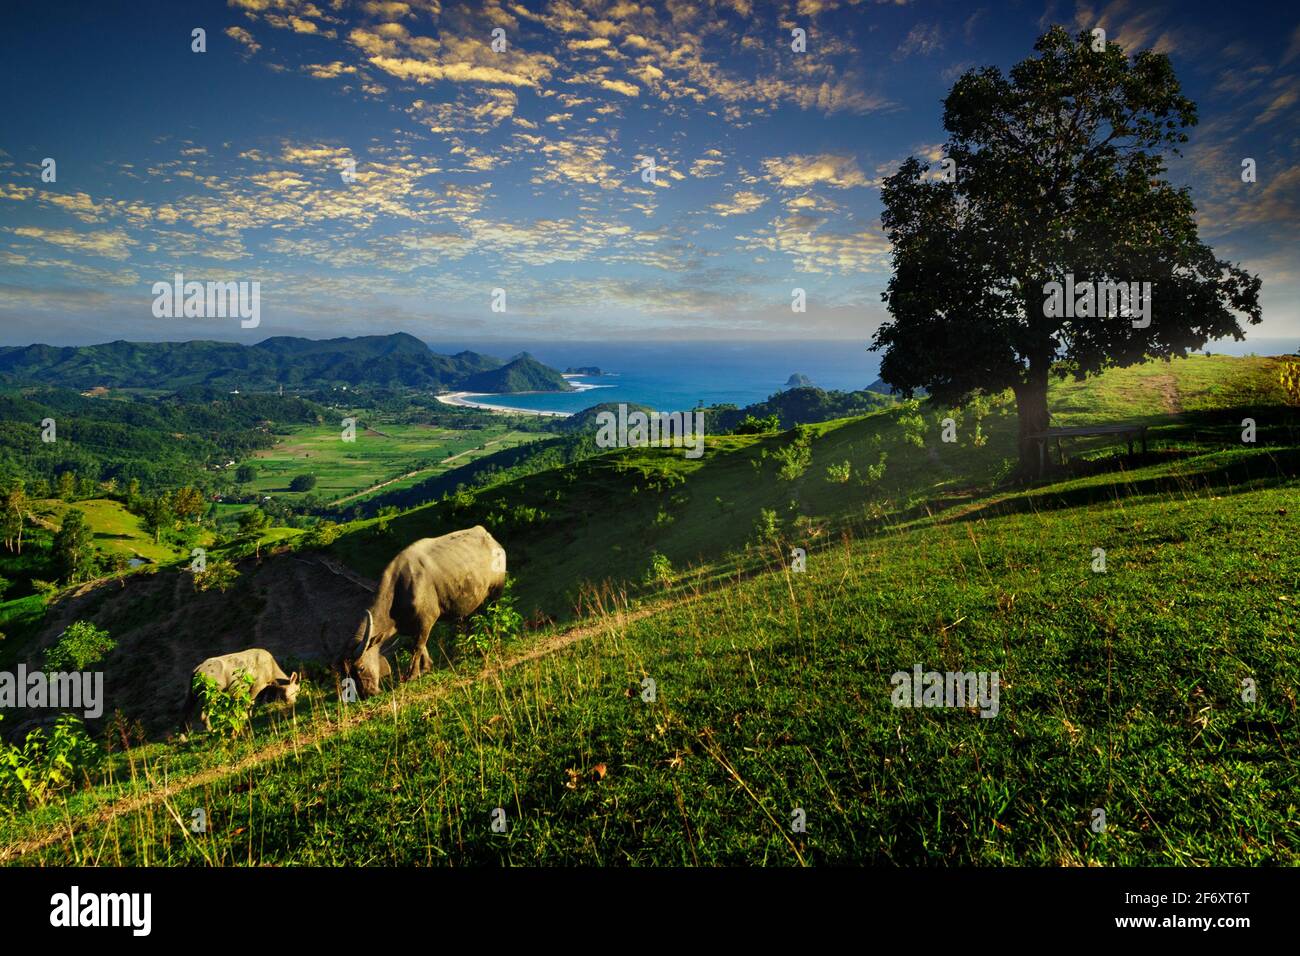 Cattle grazing in a meadow with Selong belanak beach in the distance, Lombok, West Nusa Tenggara, Indonesia Stock Photo